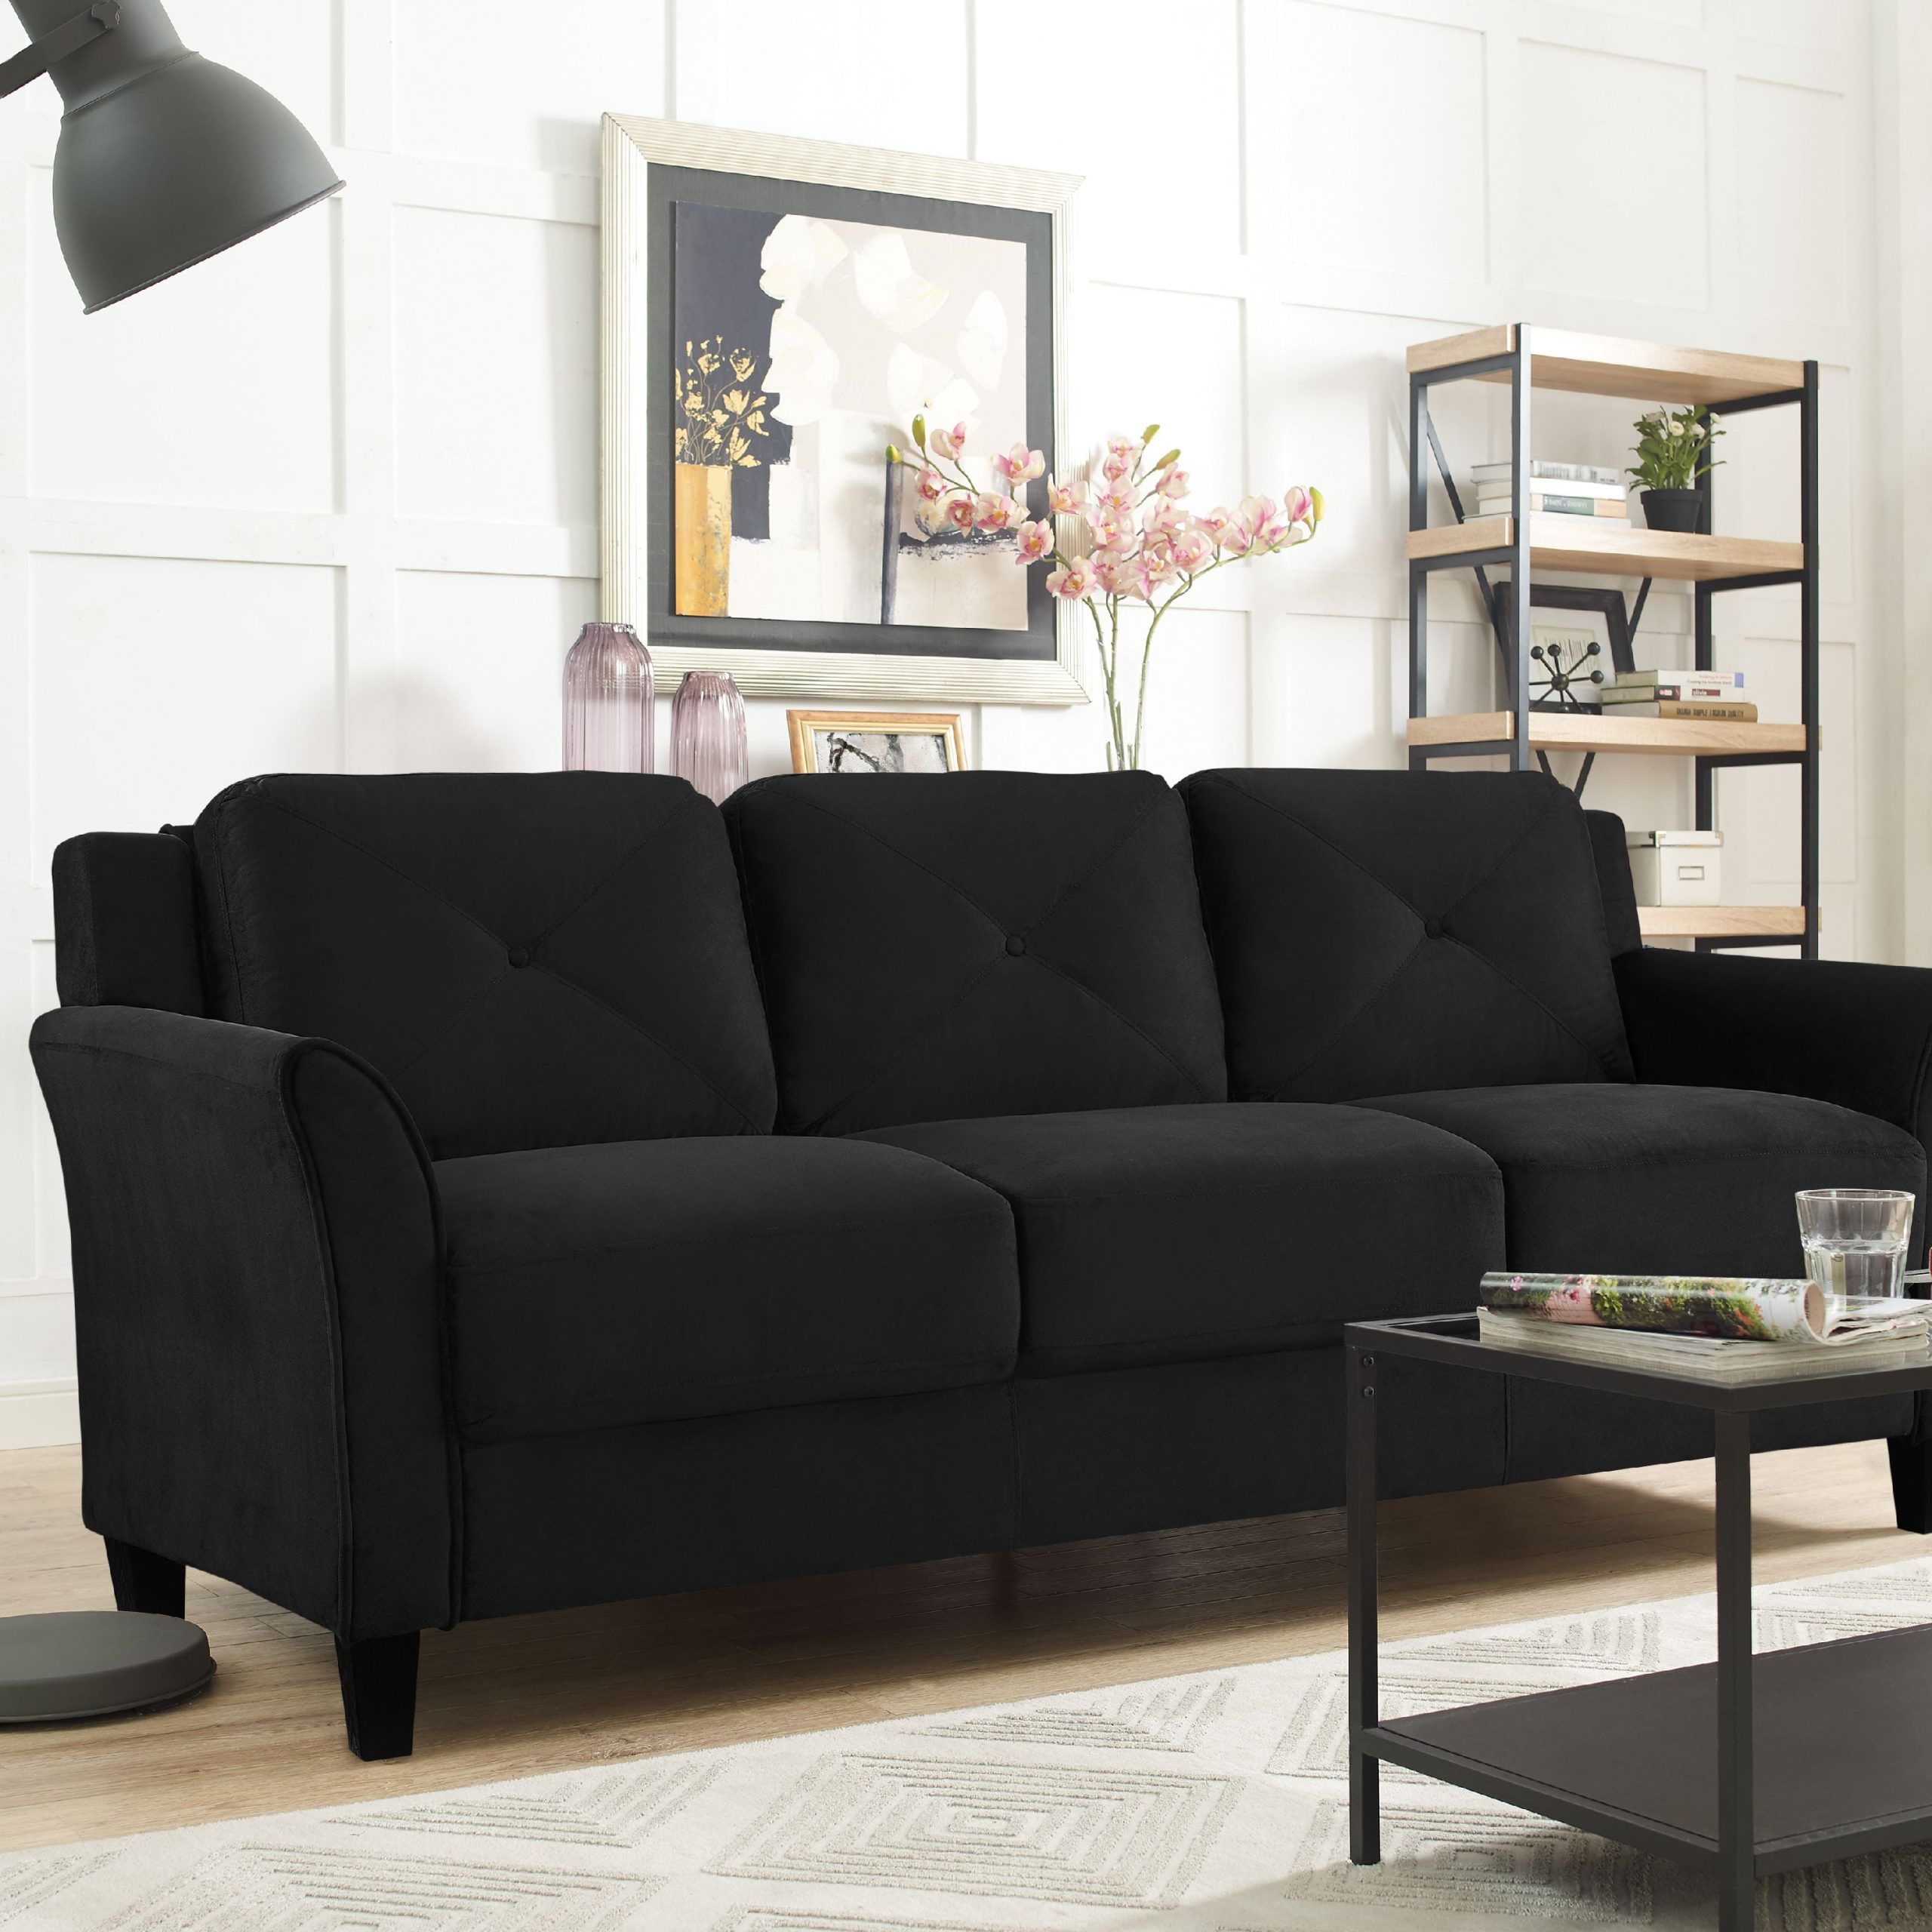 Lifestyle Solutions Taryn Curved Arm Fabric Sofa, Black – Walmart With Sofas With Curved Arms (View 4 of 20)